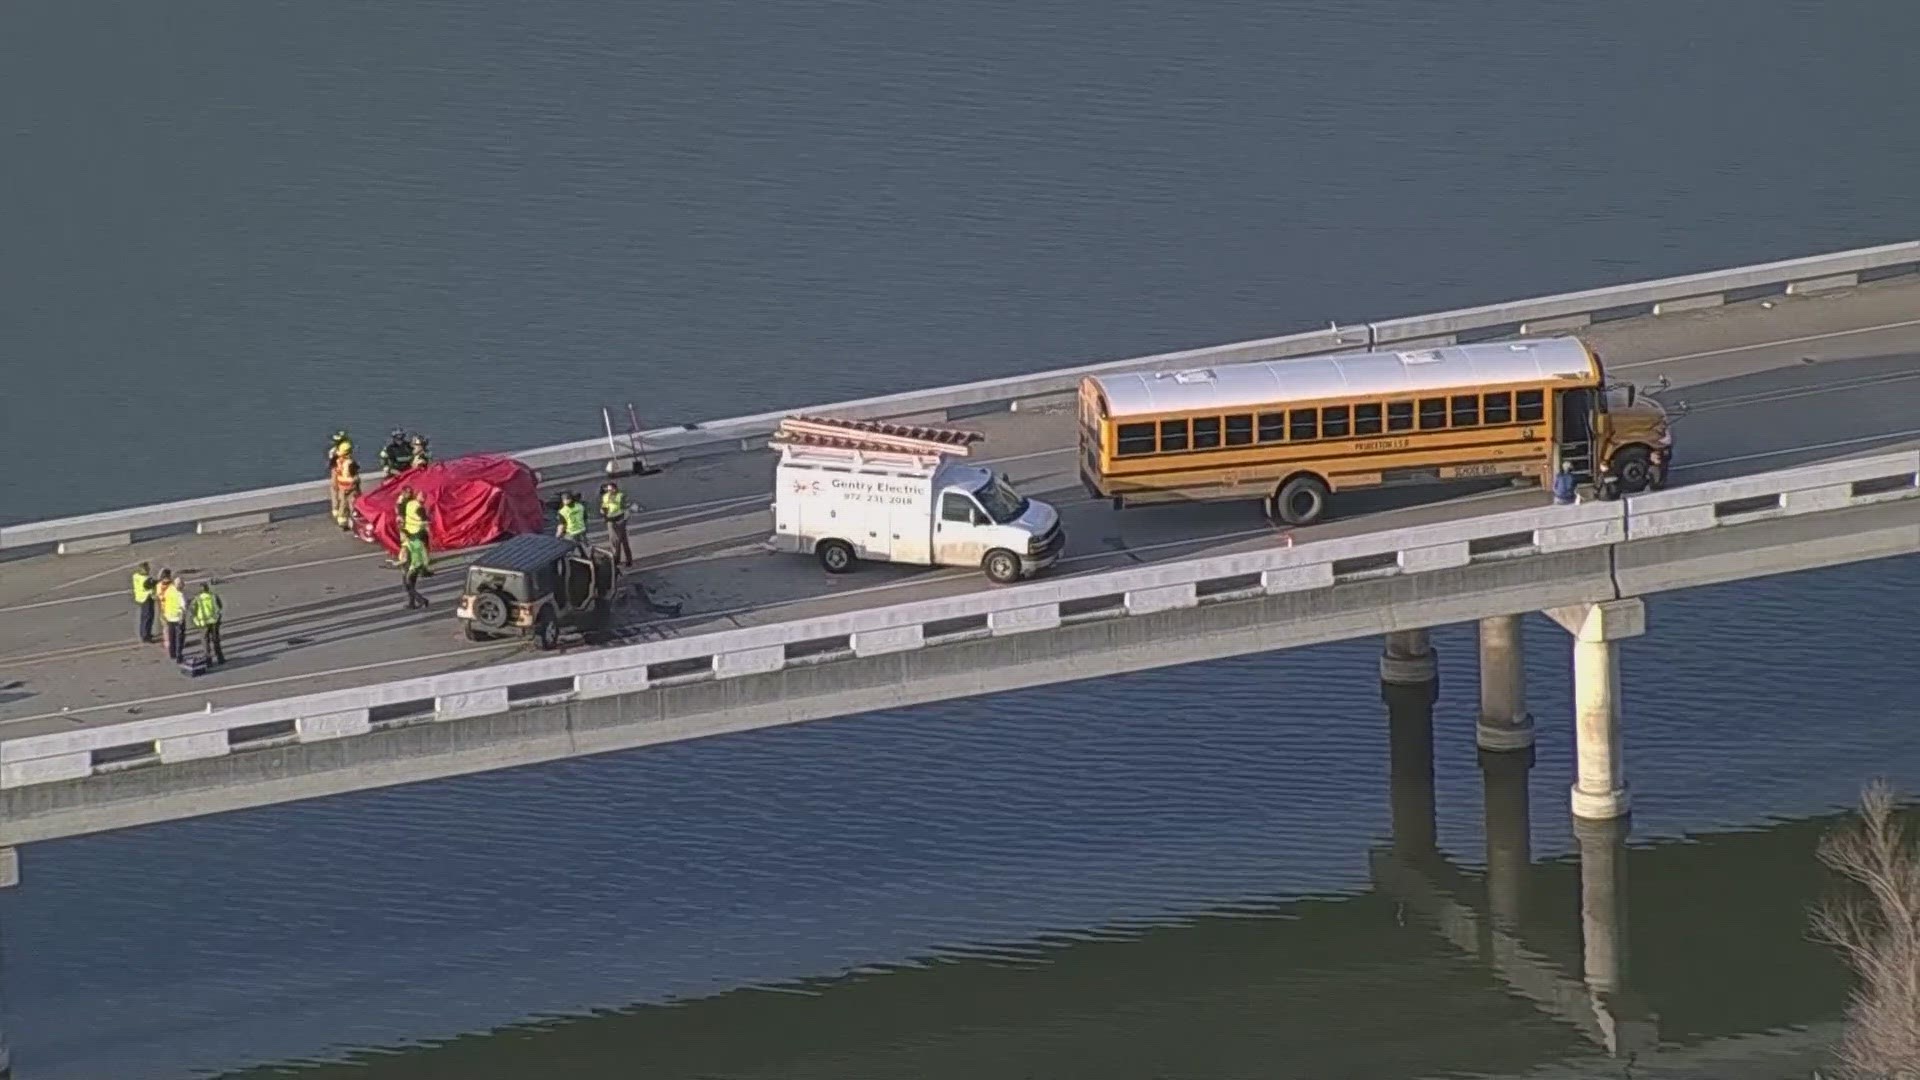 No one on the school bus was injured, but a 3rd grader riding in a sedan was killed.